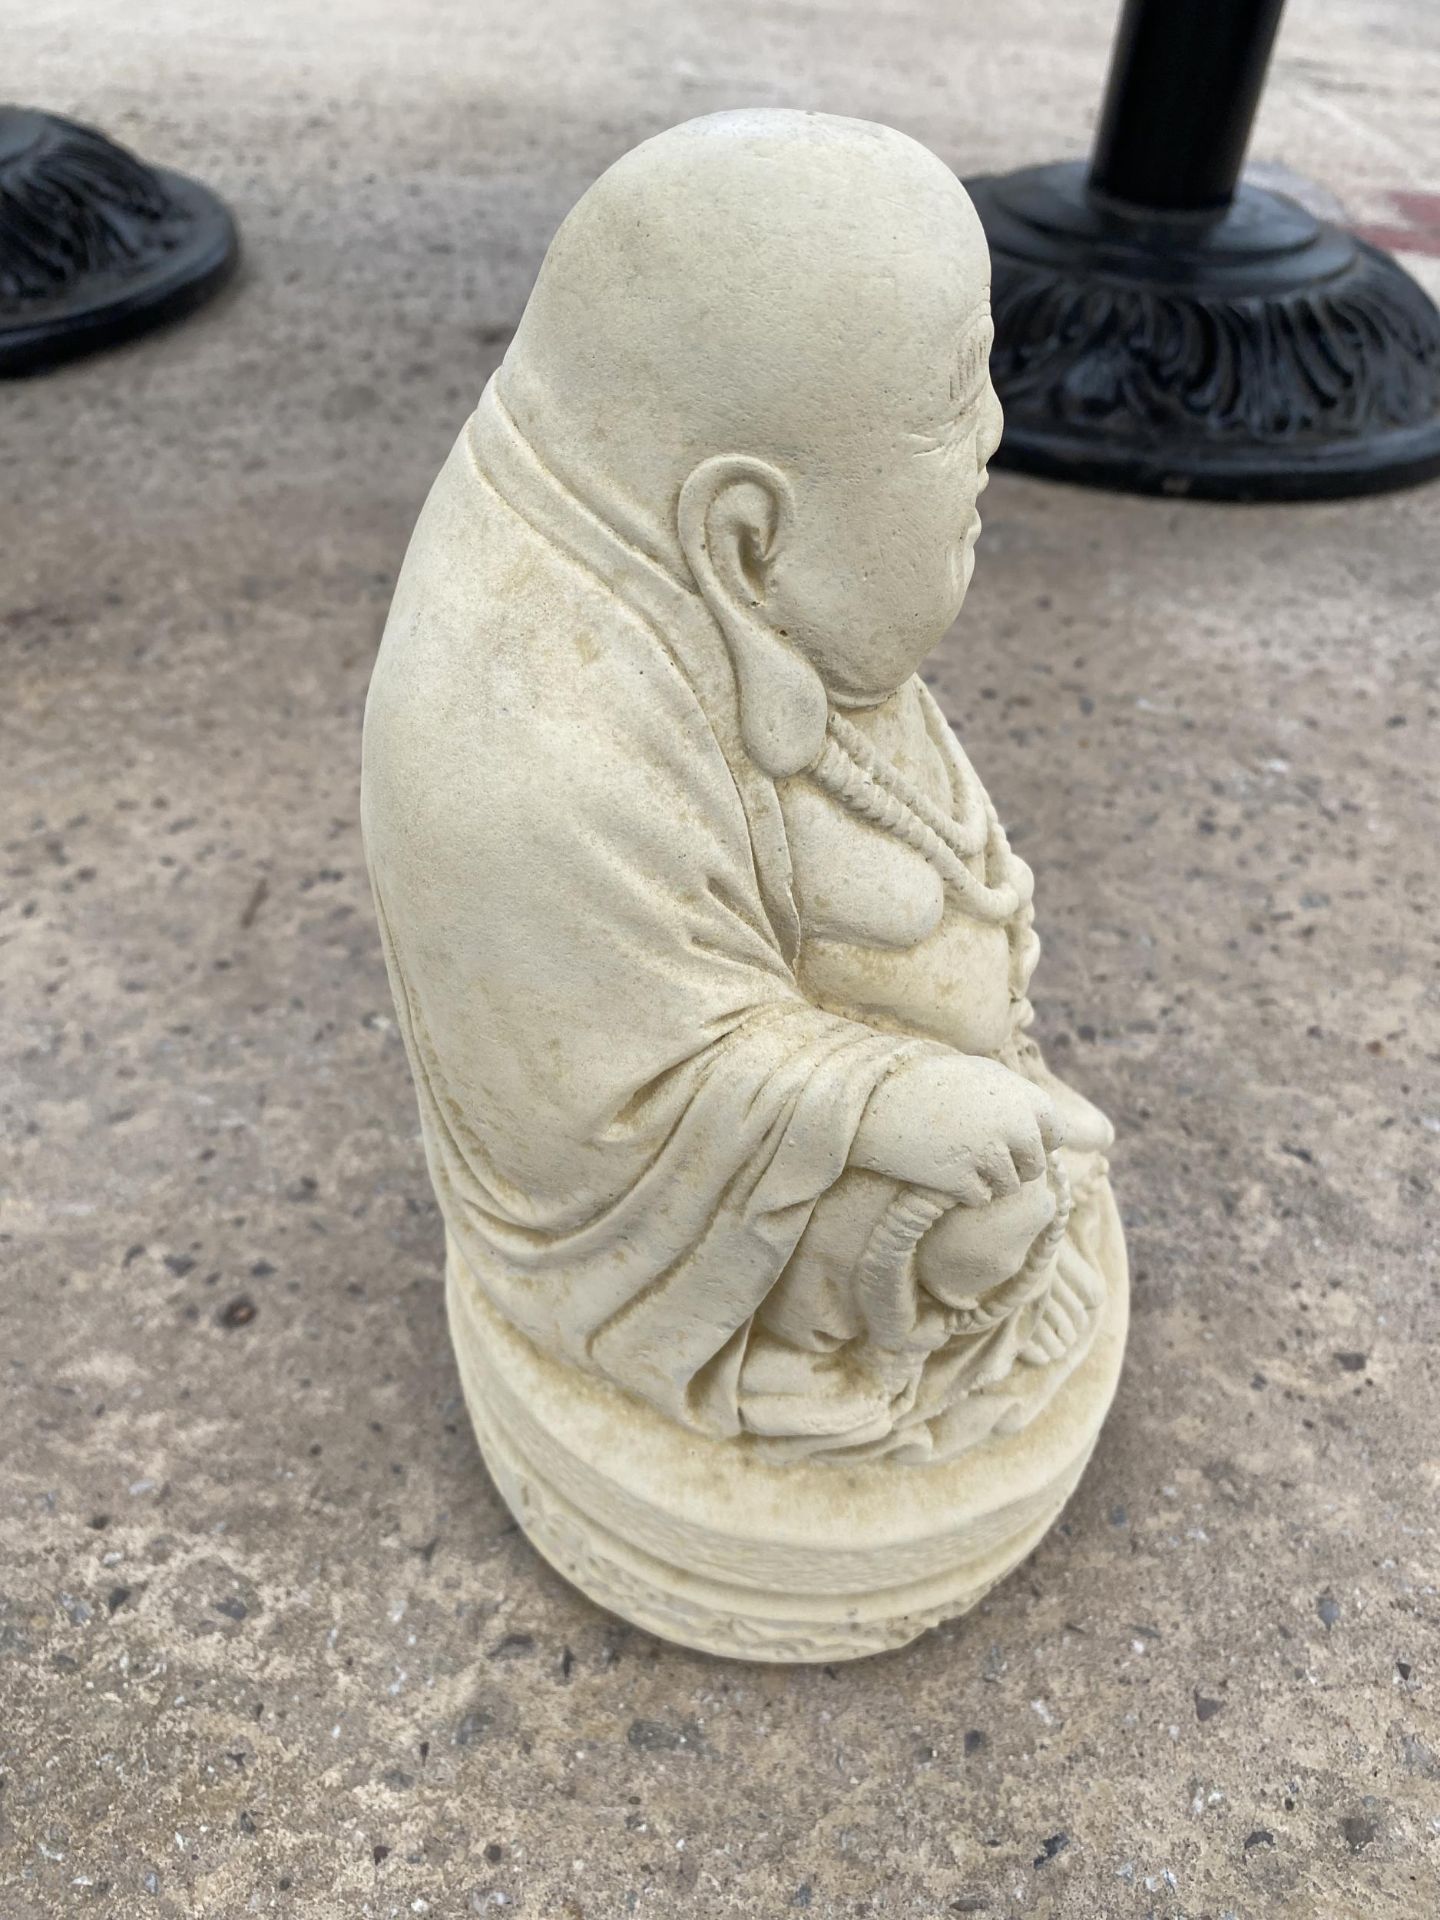 AN AS NEW EX DISPLAY CONCRETE 'SMALL BUDDHA' STATUE *PLEASE NOTE VAT TO BE PAID ON THIS ITEM* - Image 3 of 4